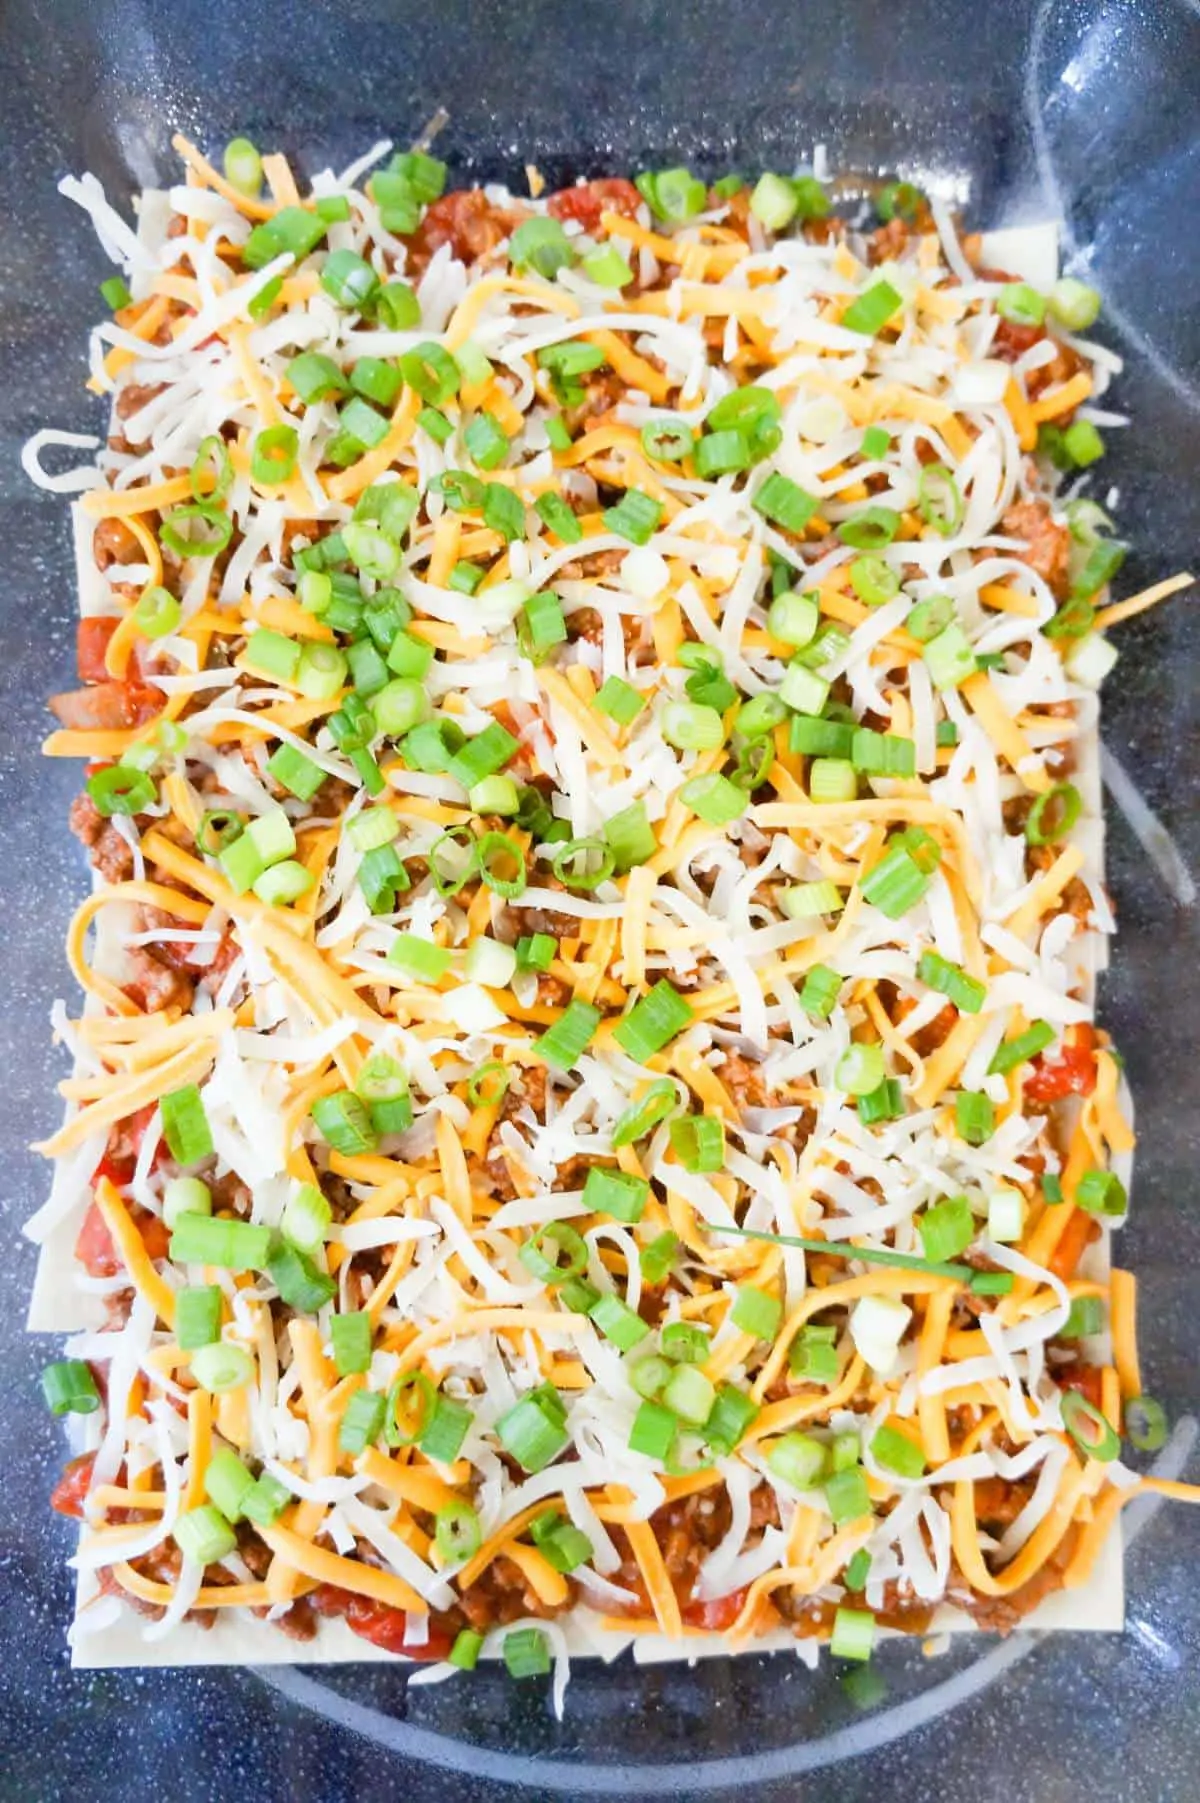 chopped green onions and shredded cheese on top of meat and tortillas in a baking dish